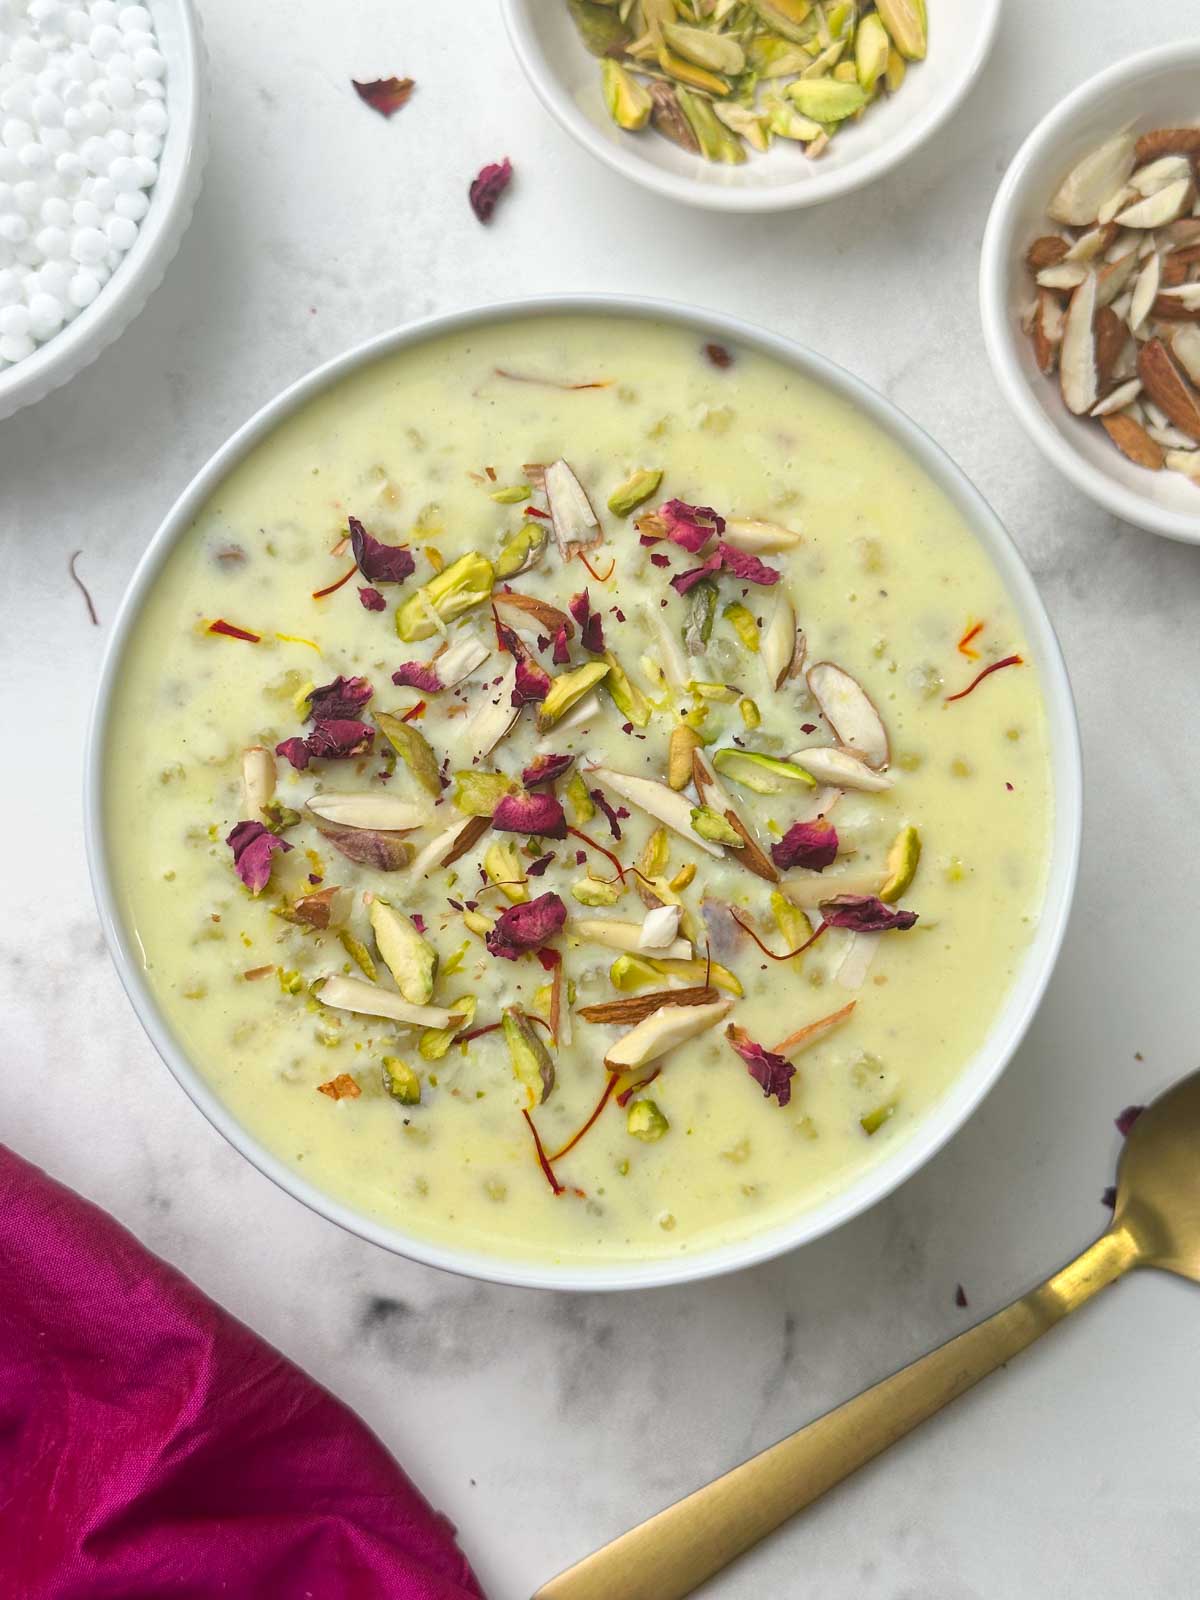 sabudana kheer (indian tapioca pudding) served in a bowl garnished with rose petals and nuts and spoon on the side